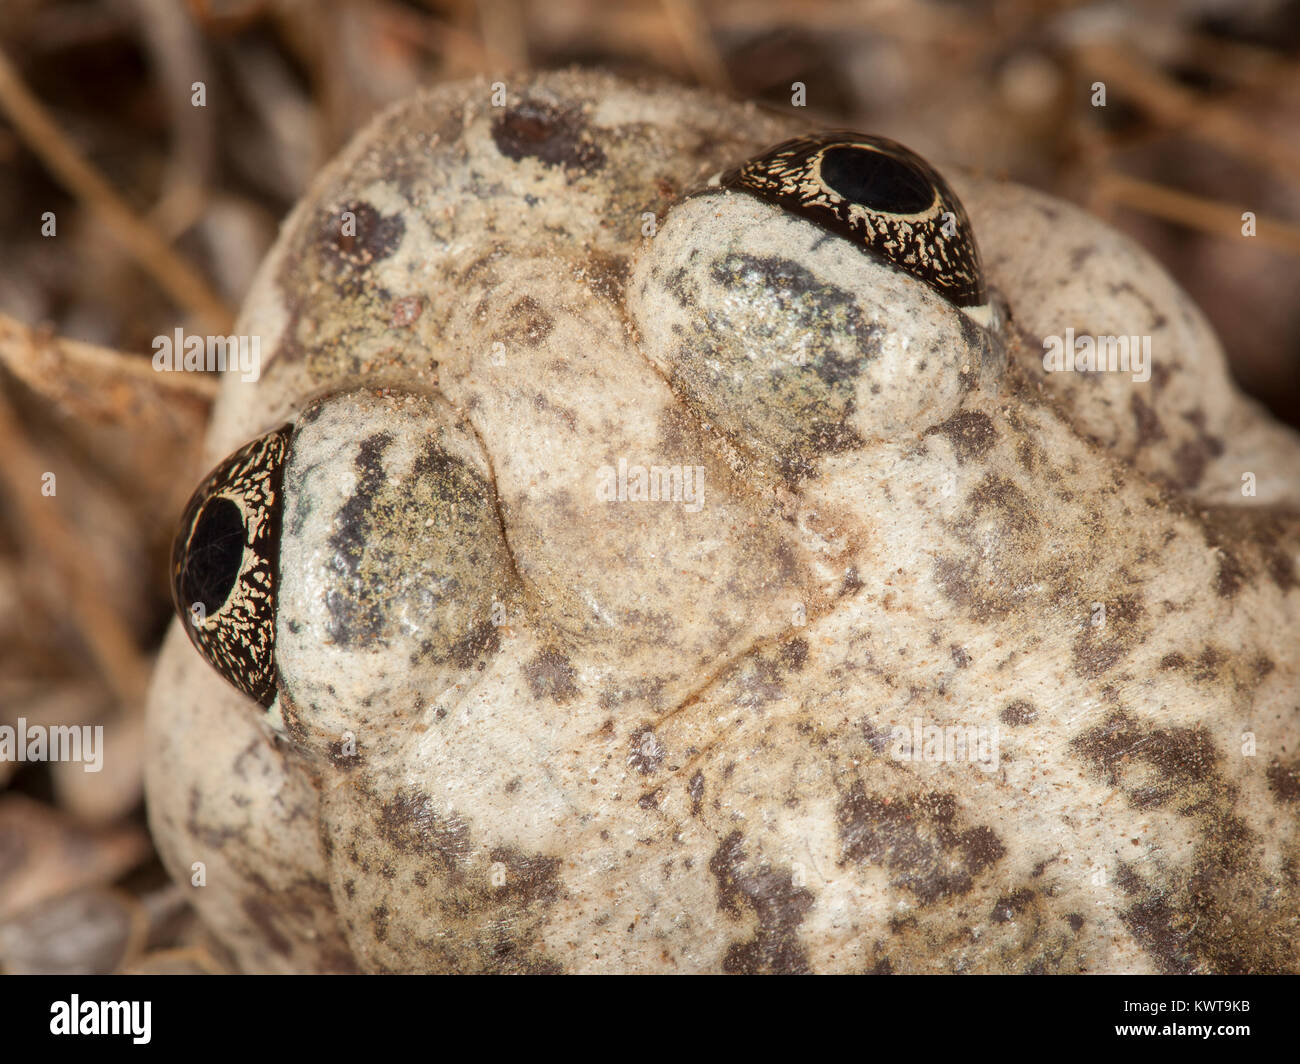 Close up of a Great Basin spadefoot toad (Spea intermontana). Spadefoots burrow underground to survive dry weather, and emerge to feed and mate when t Stock Photo